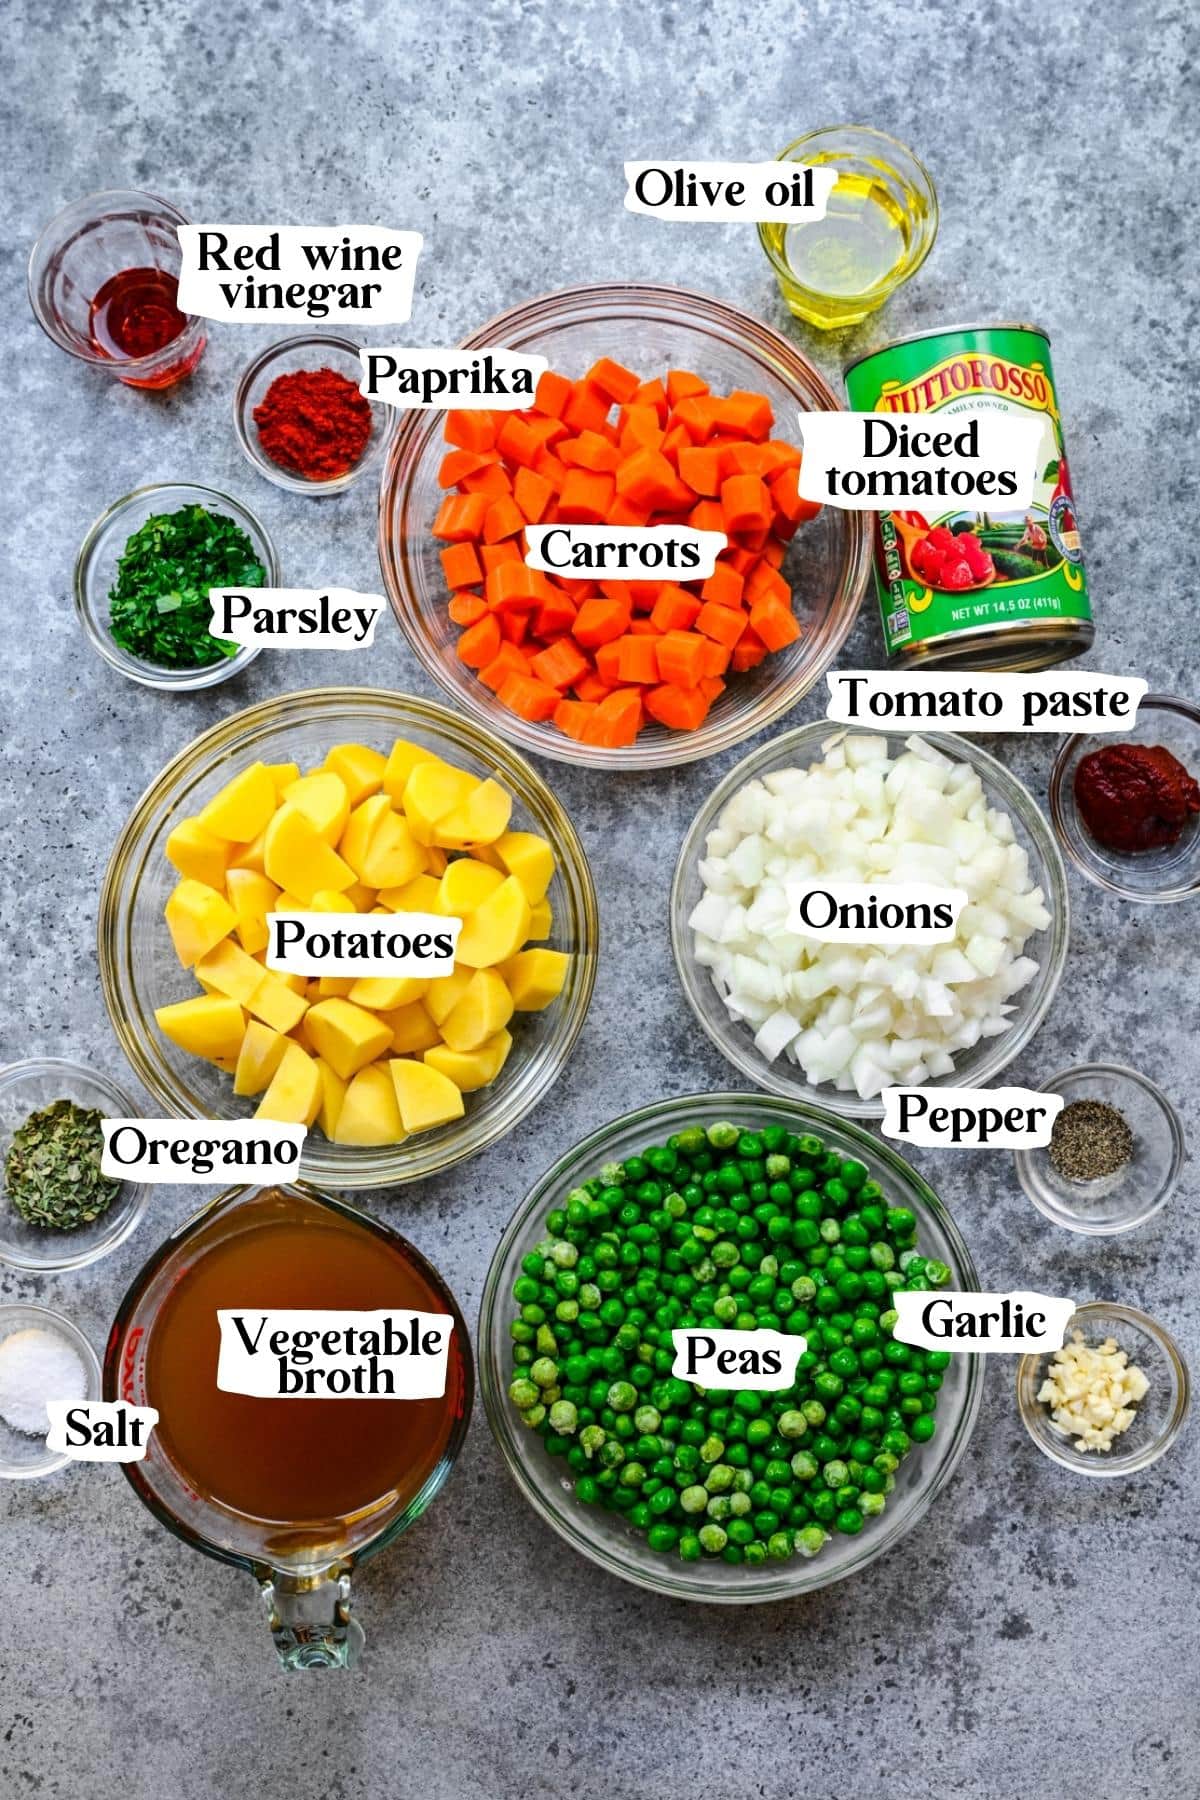 Overhead view of pea stew ingredients, including peas, carrots, and potatoes.